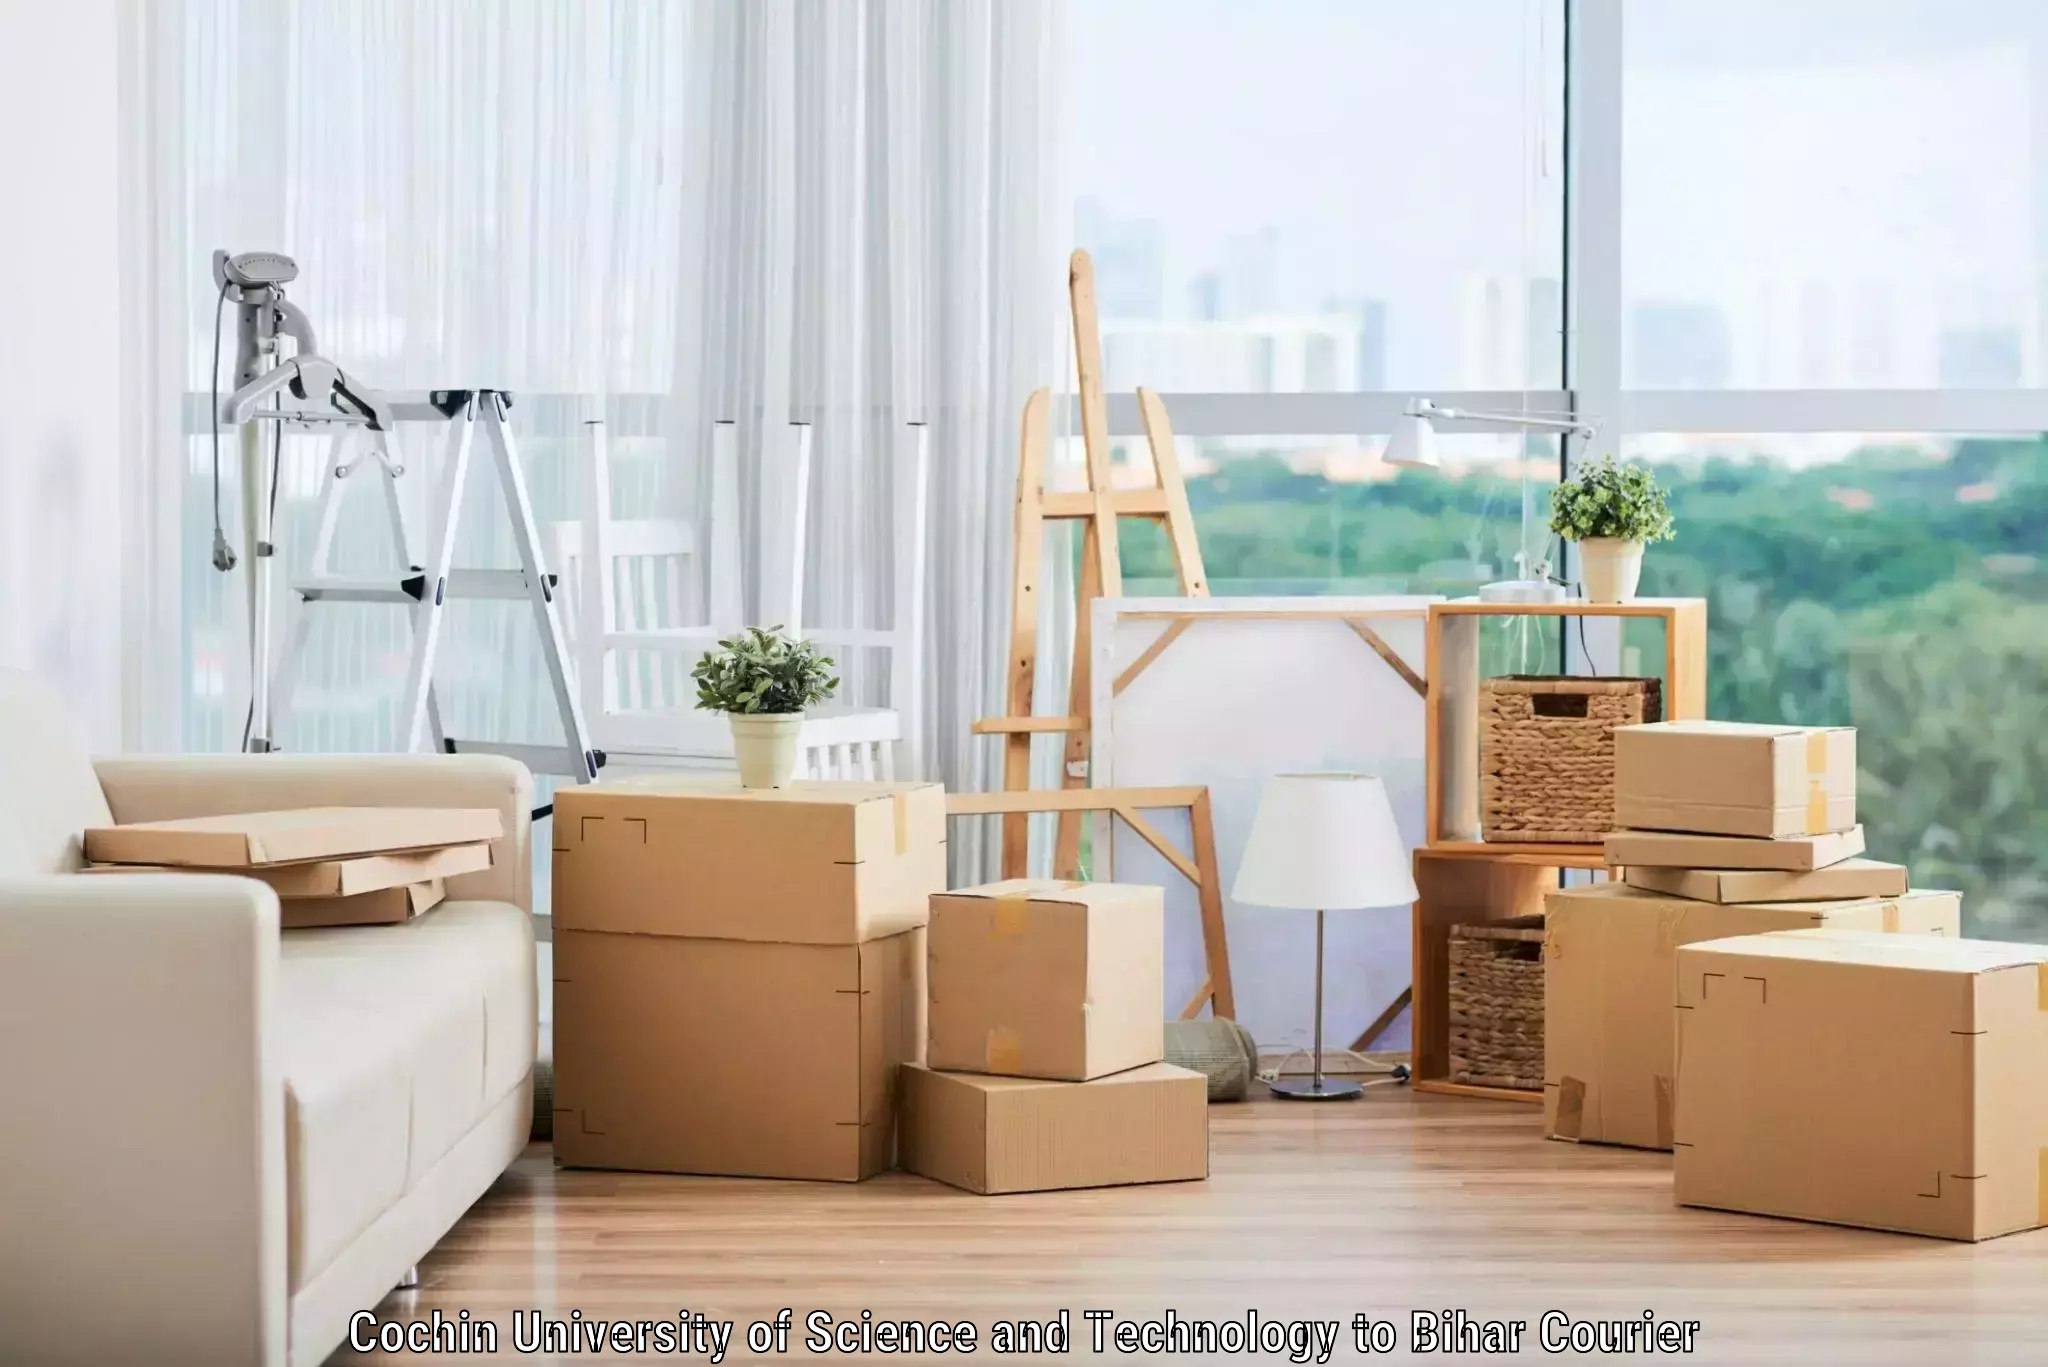 Furniture delivery service Cochin University of Science and Technology to Alamnagar